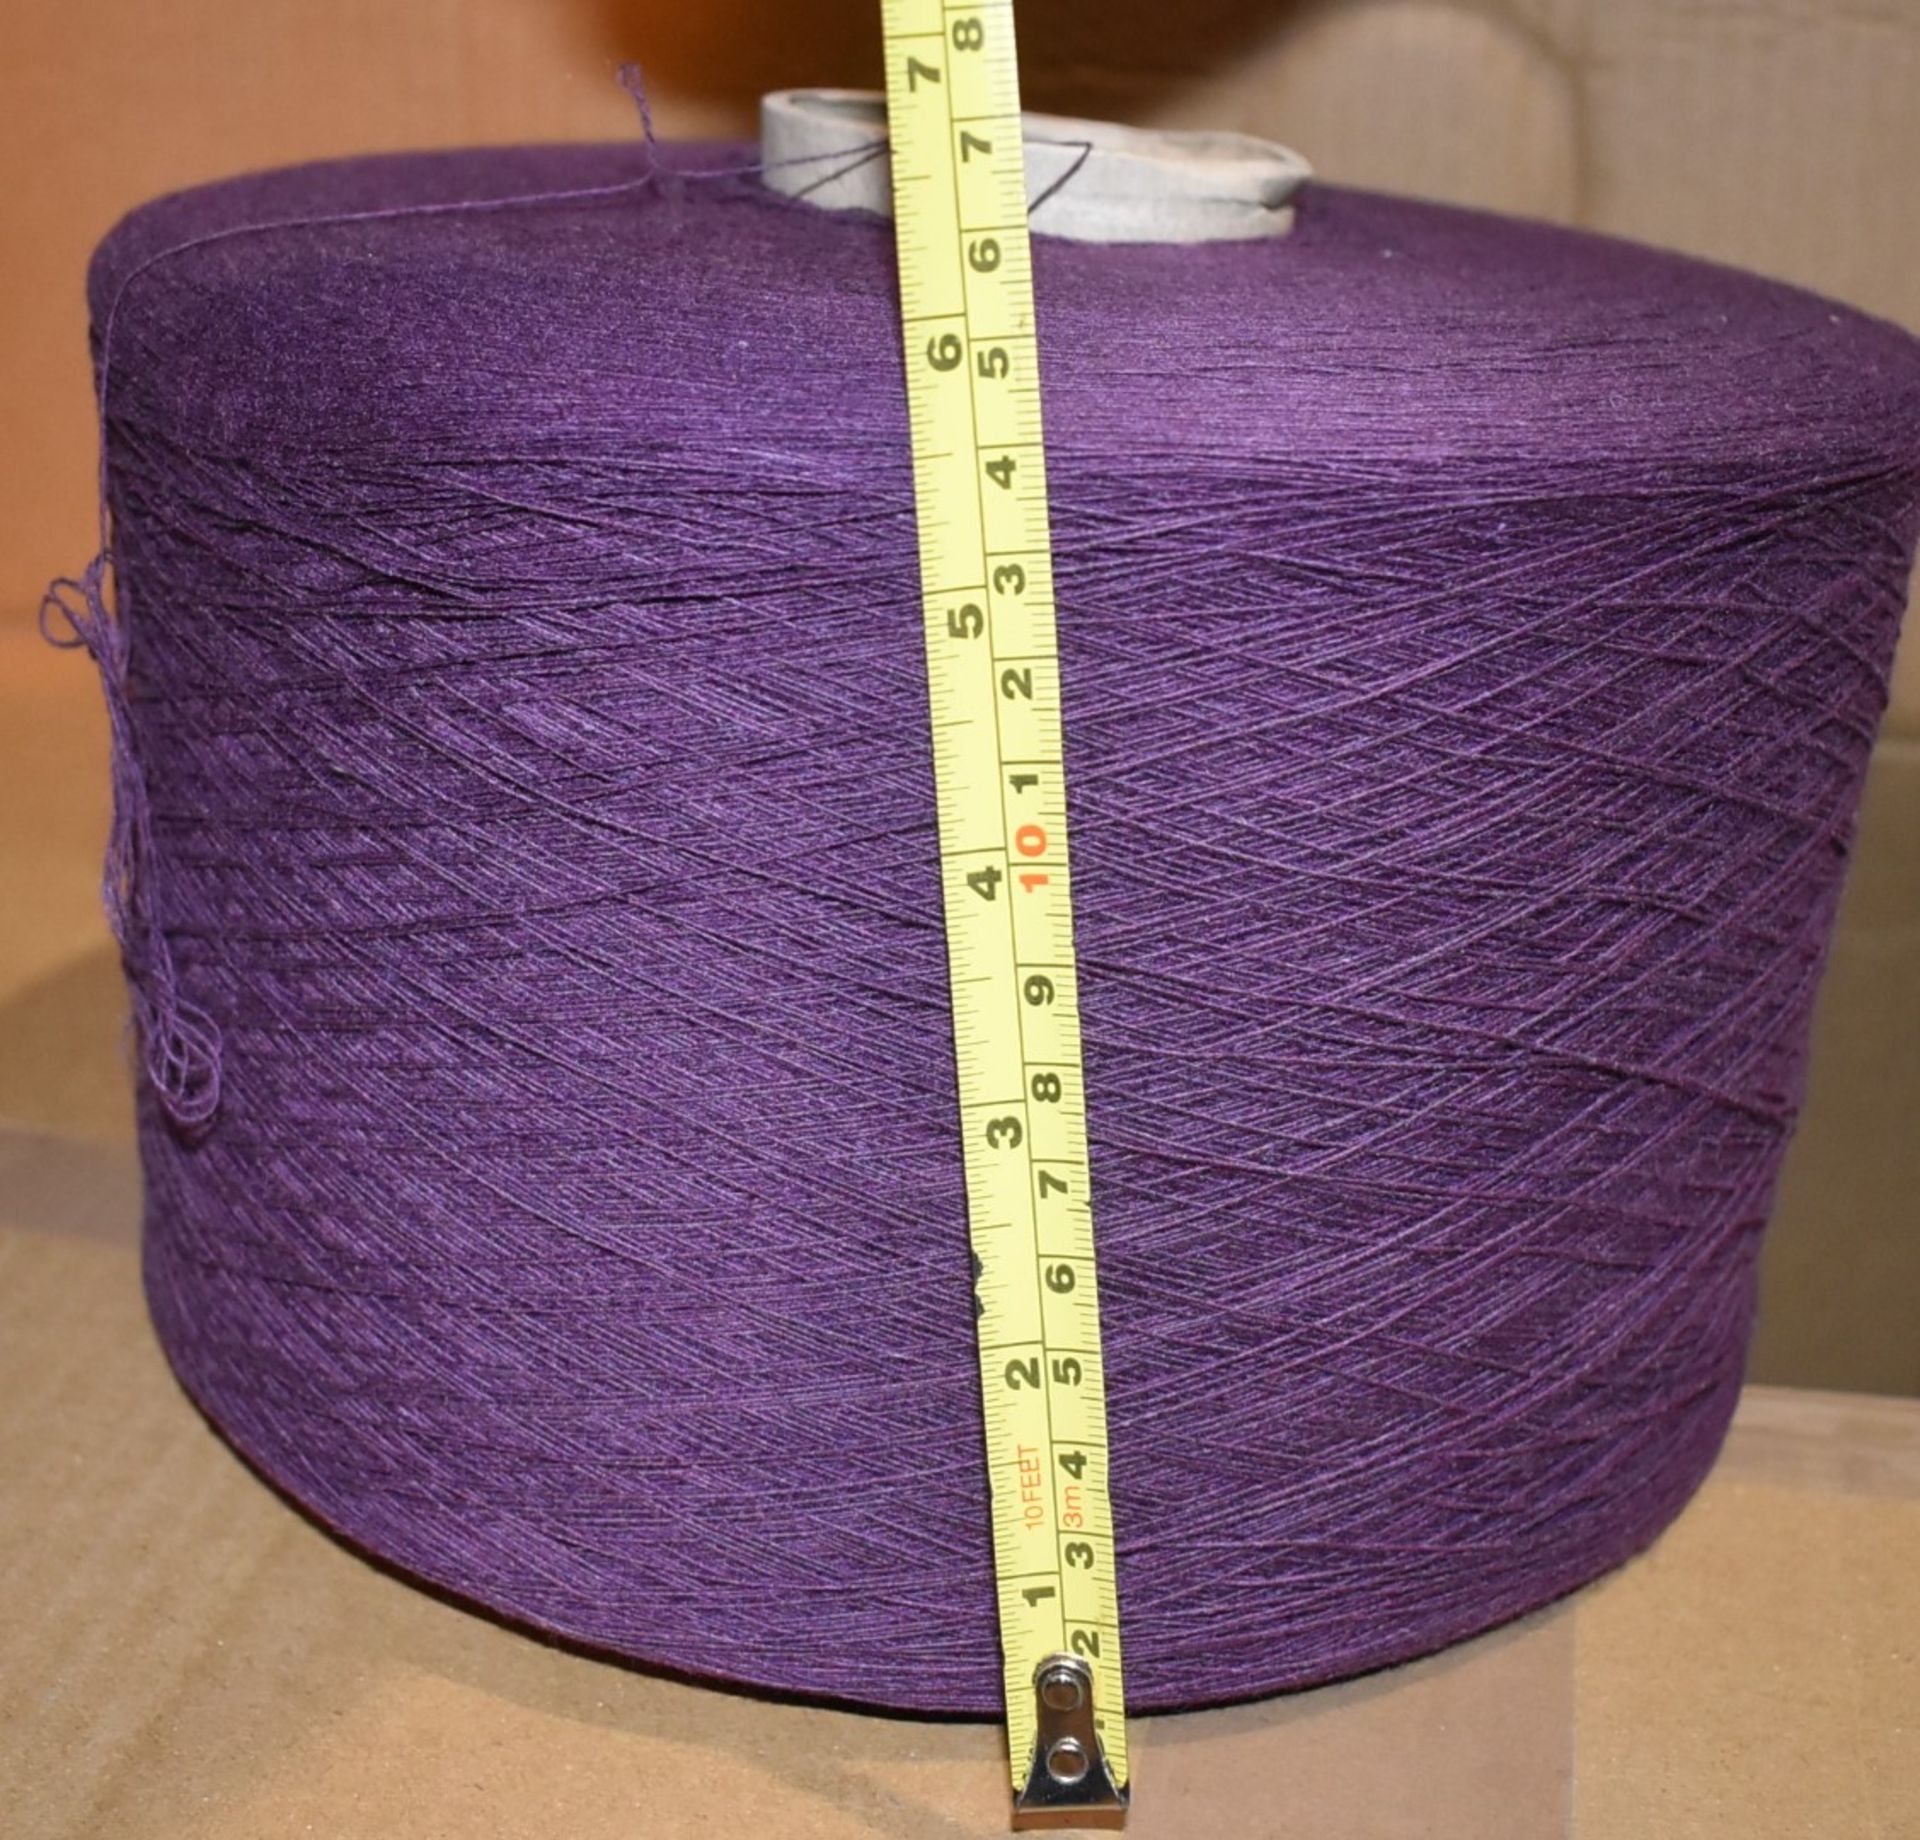 6 x Cones of 1/13 MicroCotton Knitting Yarn - Purple - Approx Weight: 2,300g - New Stock ABL Yarn - Image 8 of 9